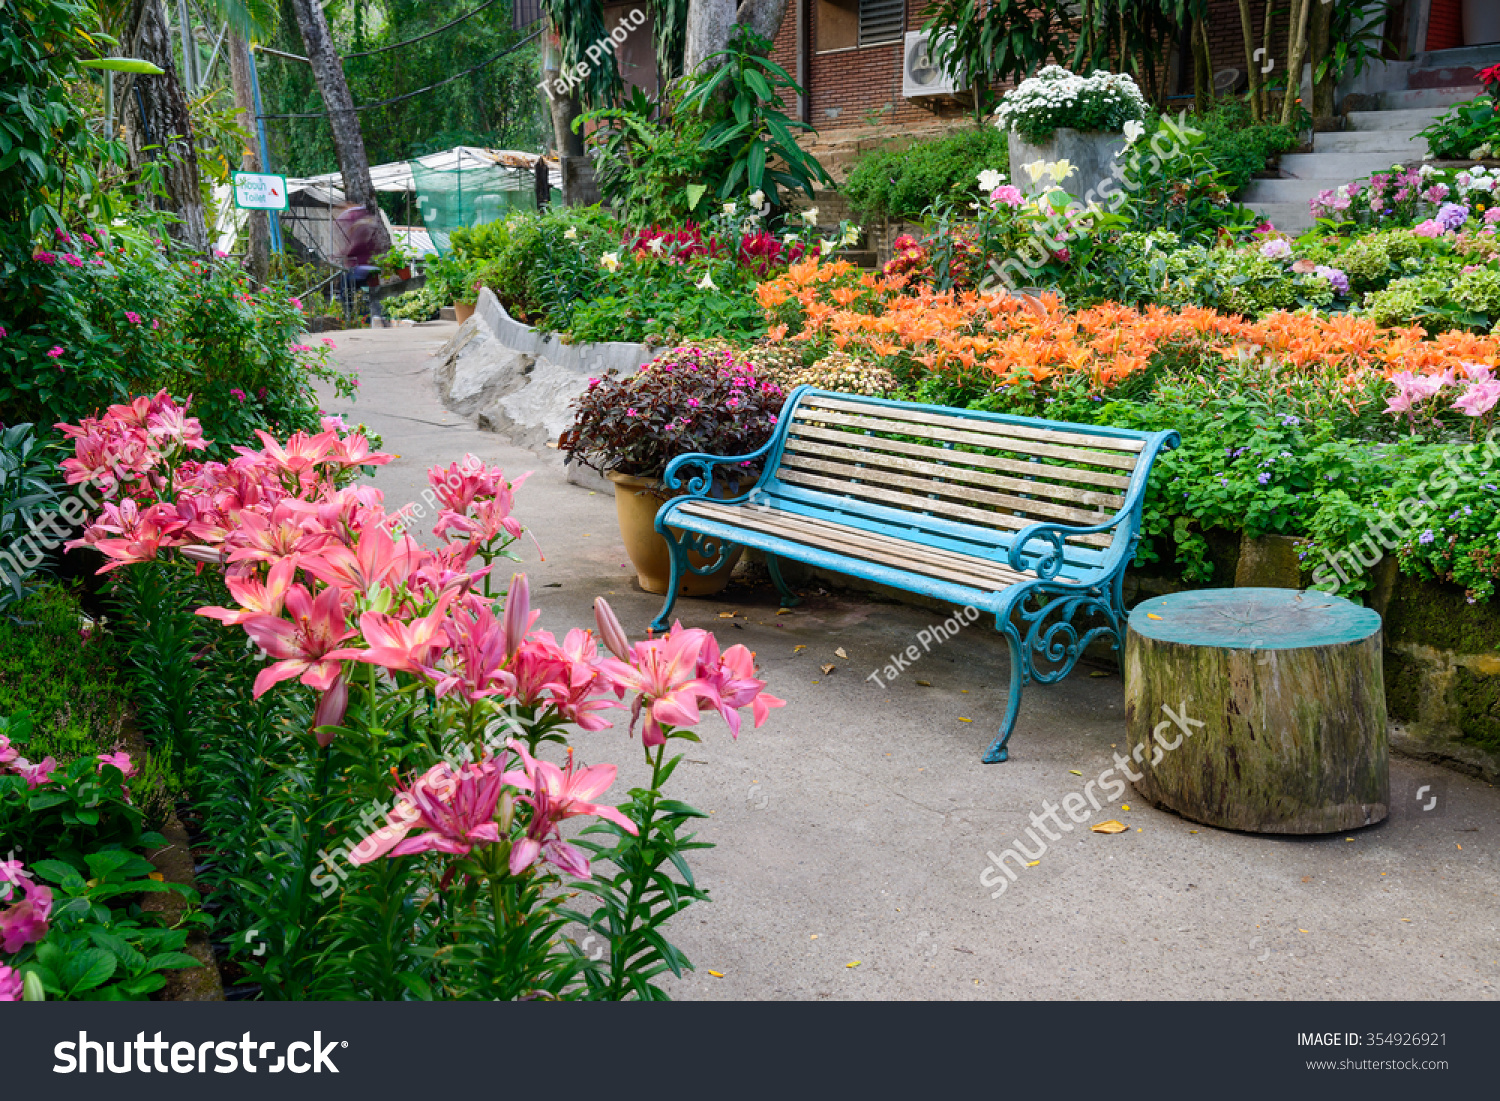 Image result for flowers and bench in garden